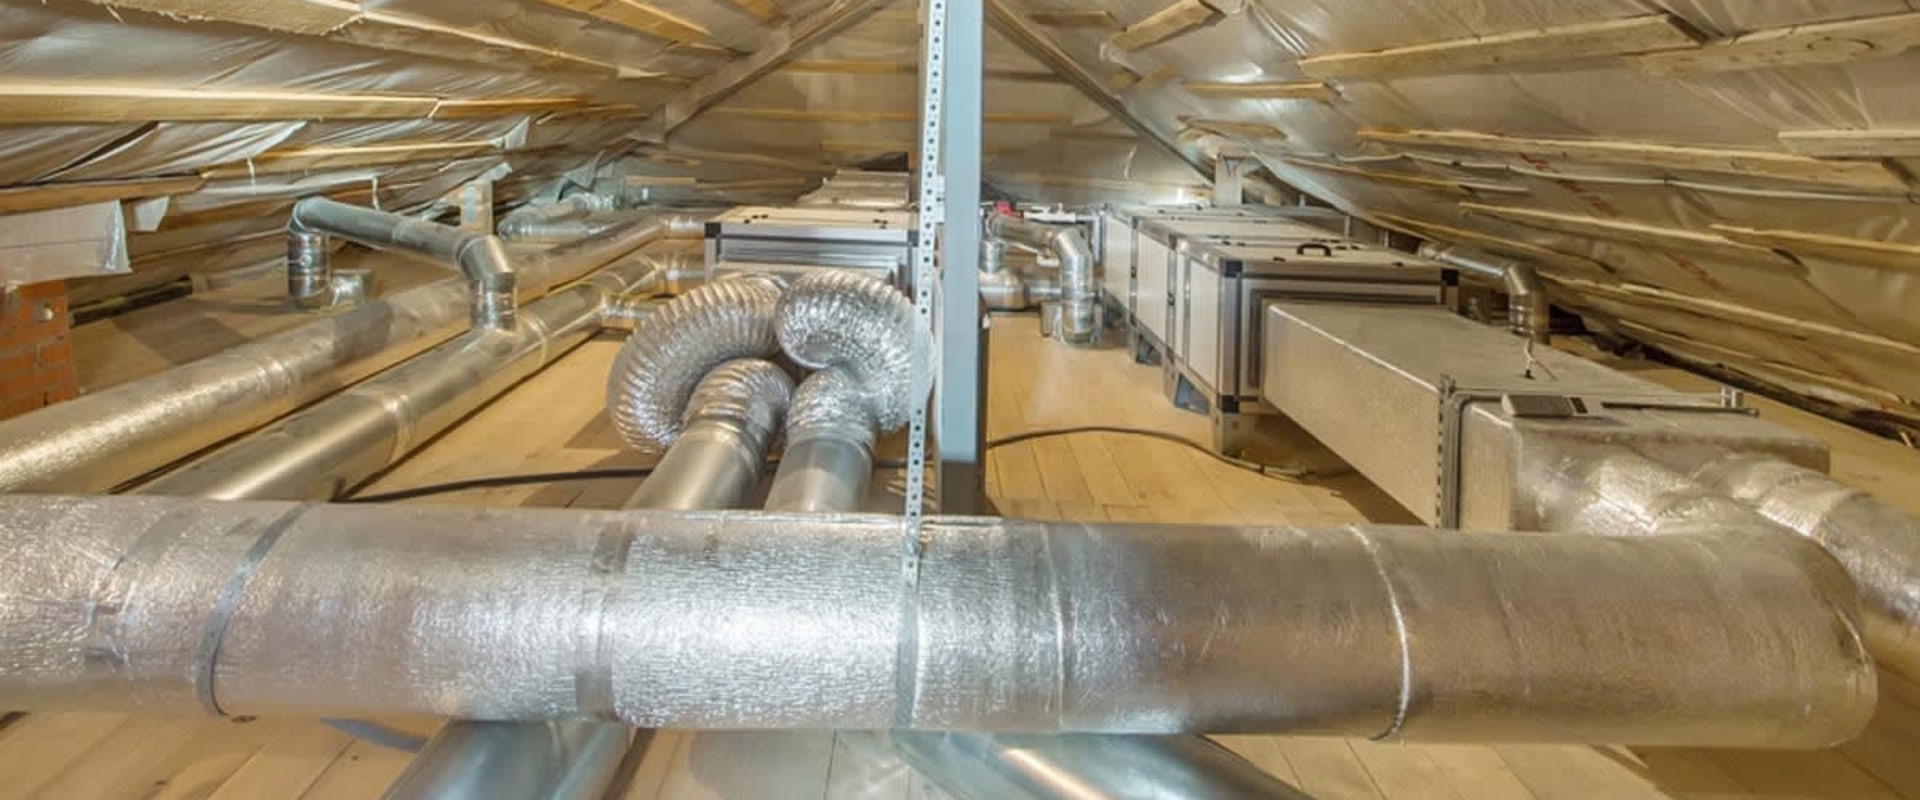 Finding a Qualified Contractor for Duct Sealing Services